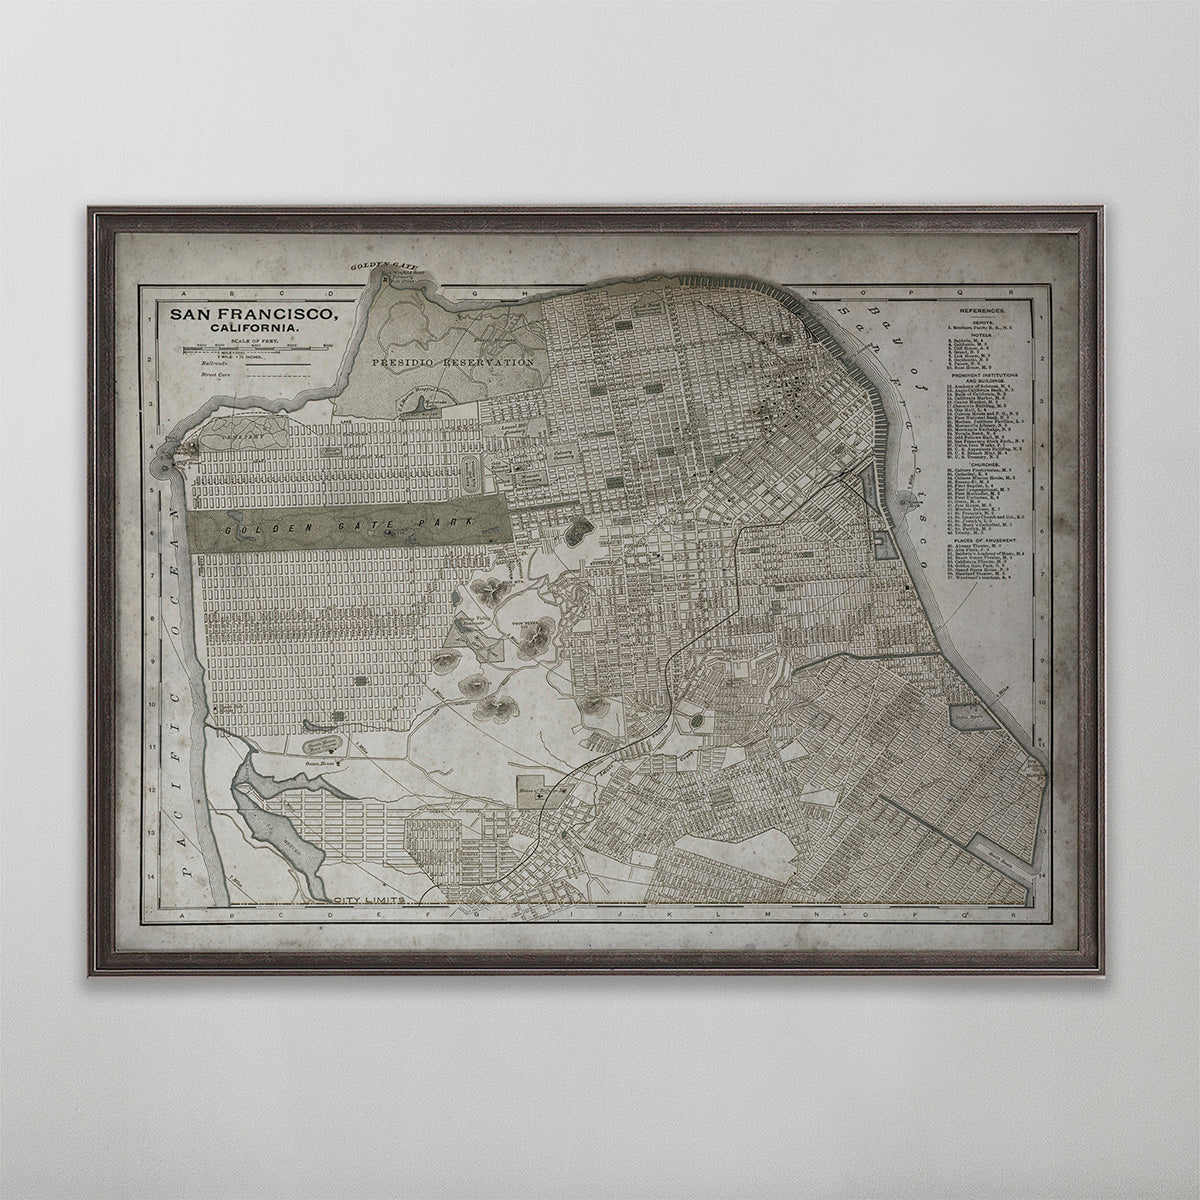 Old vintage historic map of San Francisco for wall art home decor. 